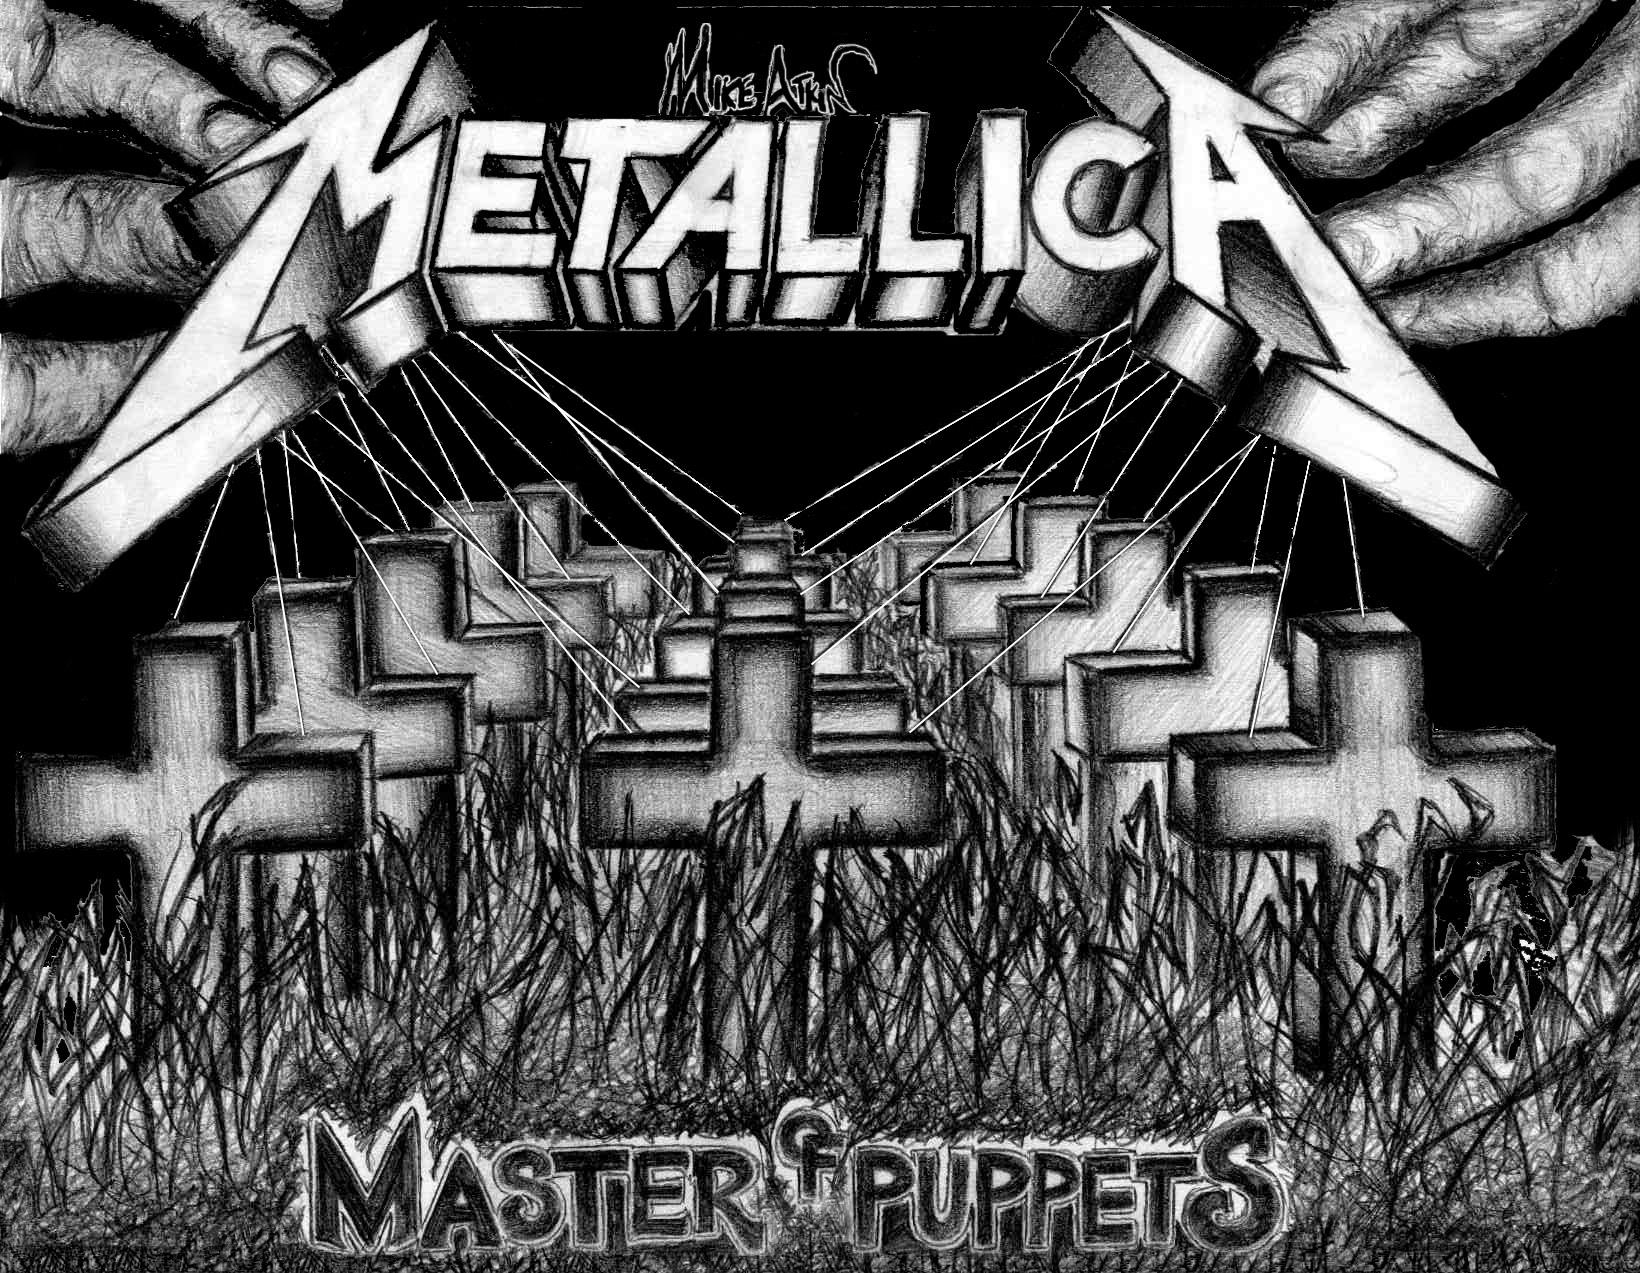 master of puppets